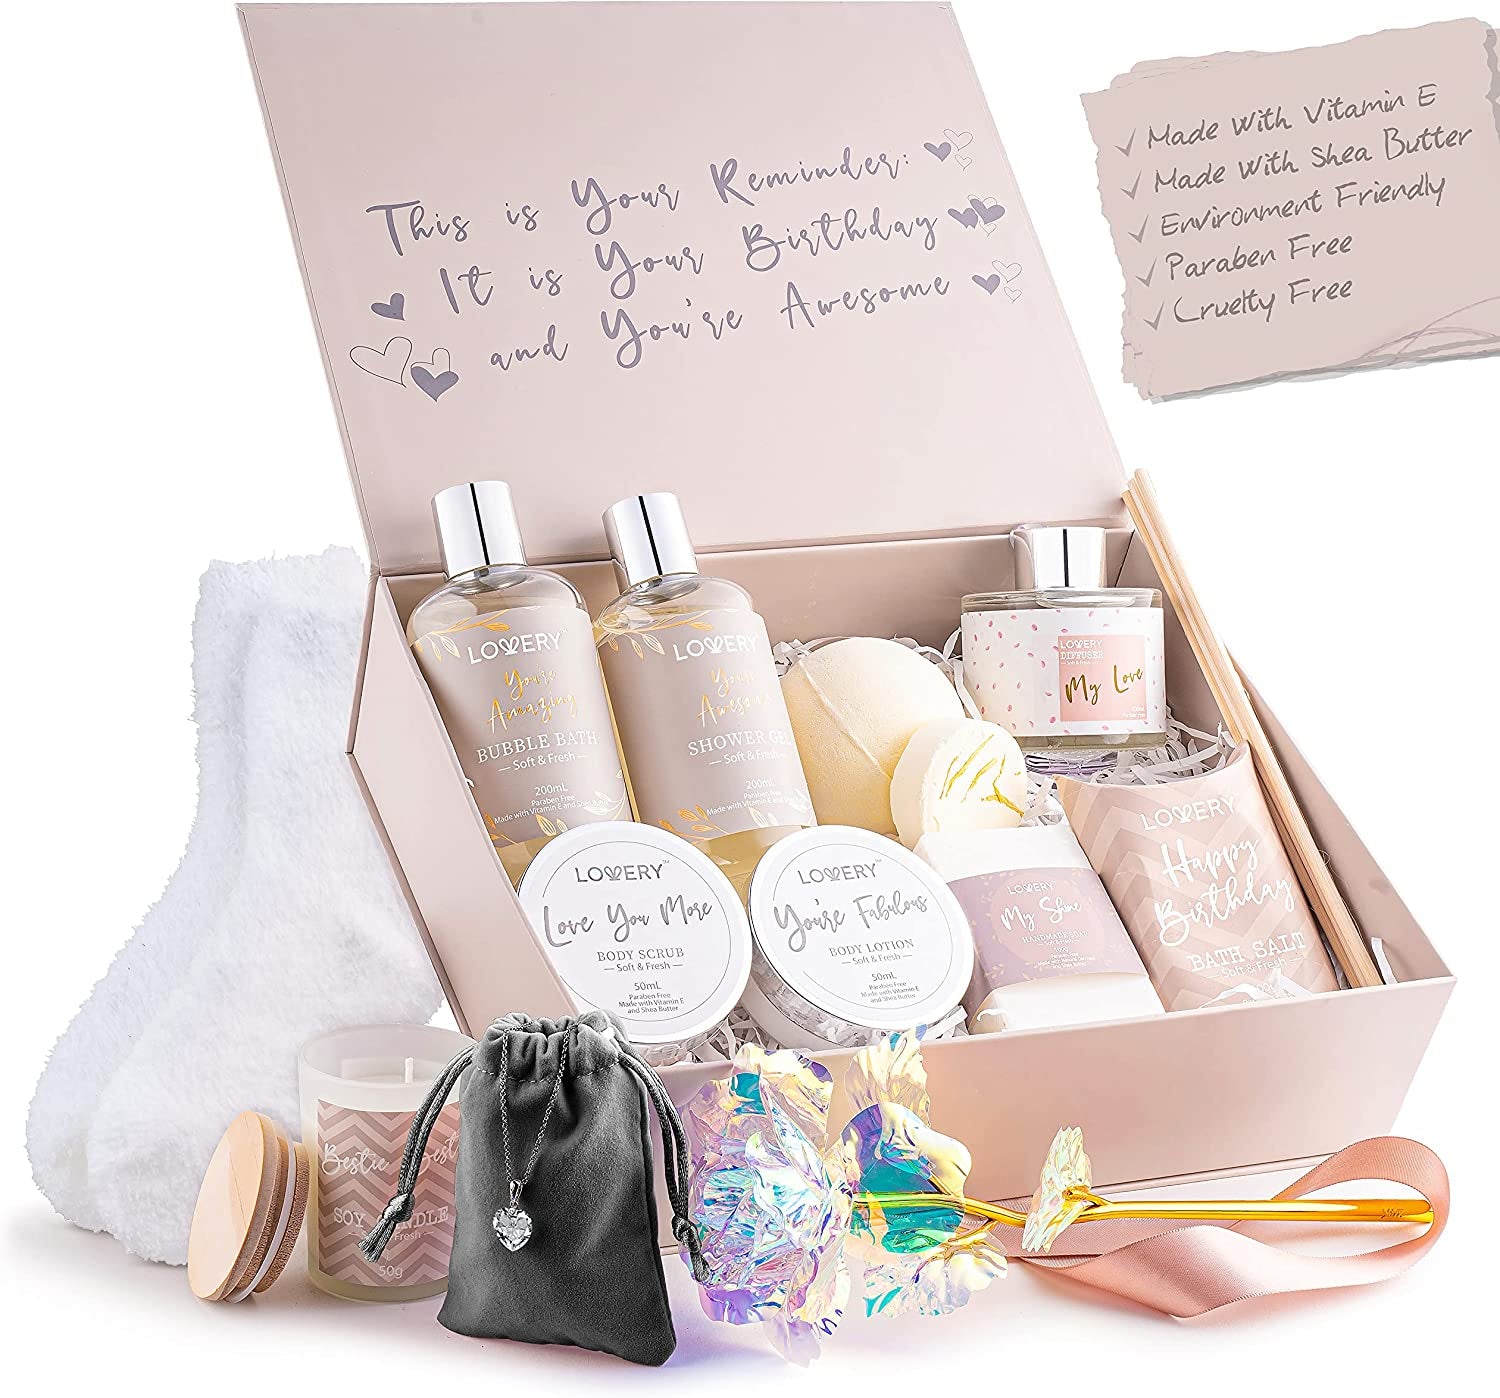 Birthday Gift Basket - Bath and Spa Gift Set for Women - Luxury Birthday Spa Gift Box with Vit E- Rich Bath Essentials, Diffuser, Candle, Sterling Silver CZ Heart Necklace, 24K Flower Rose Gift & More